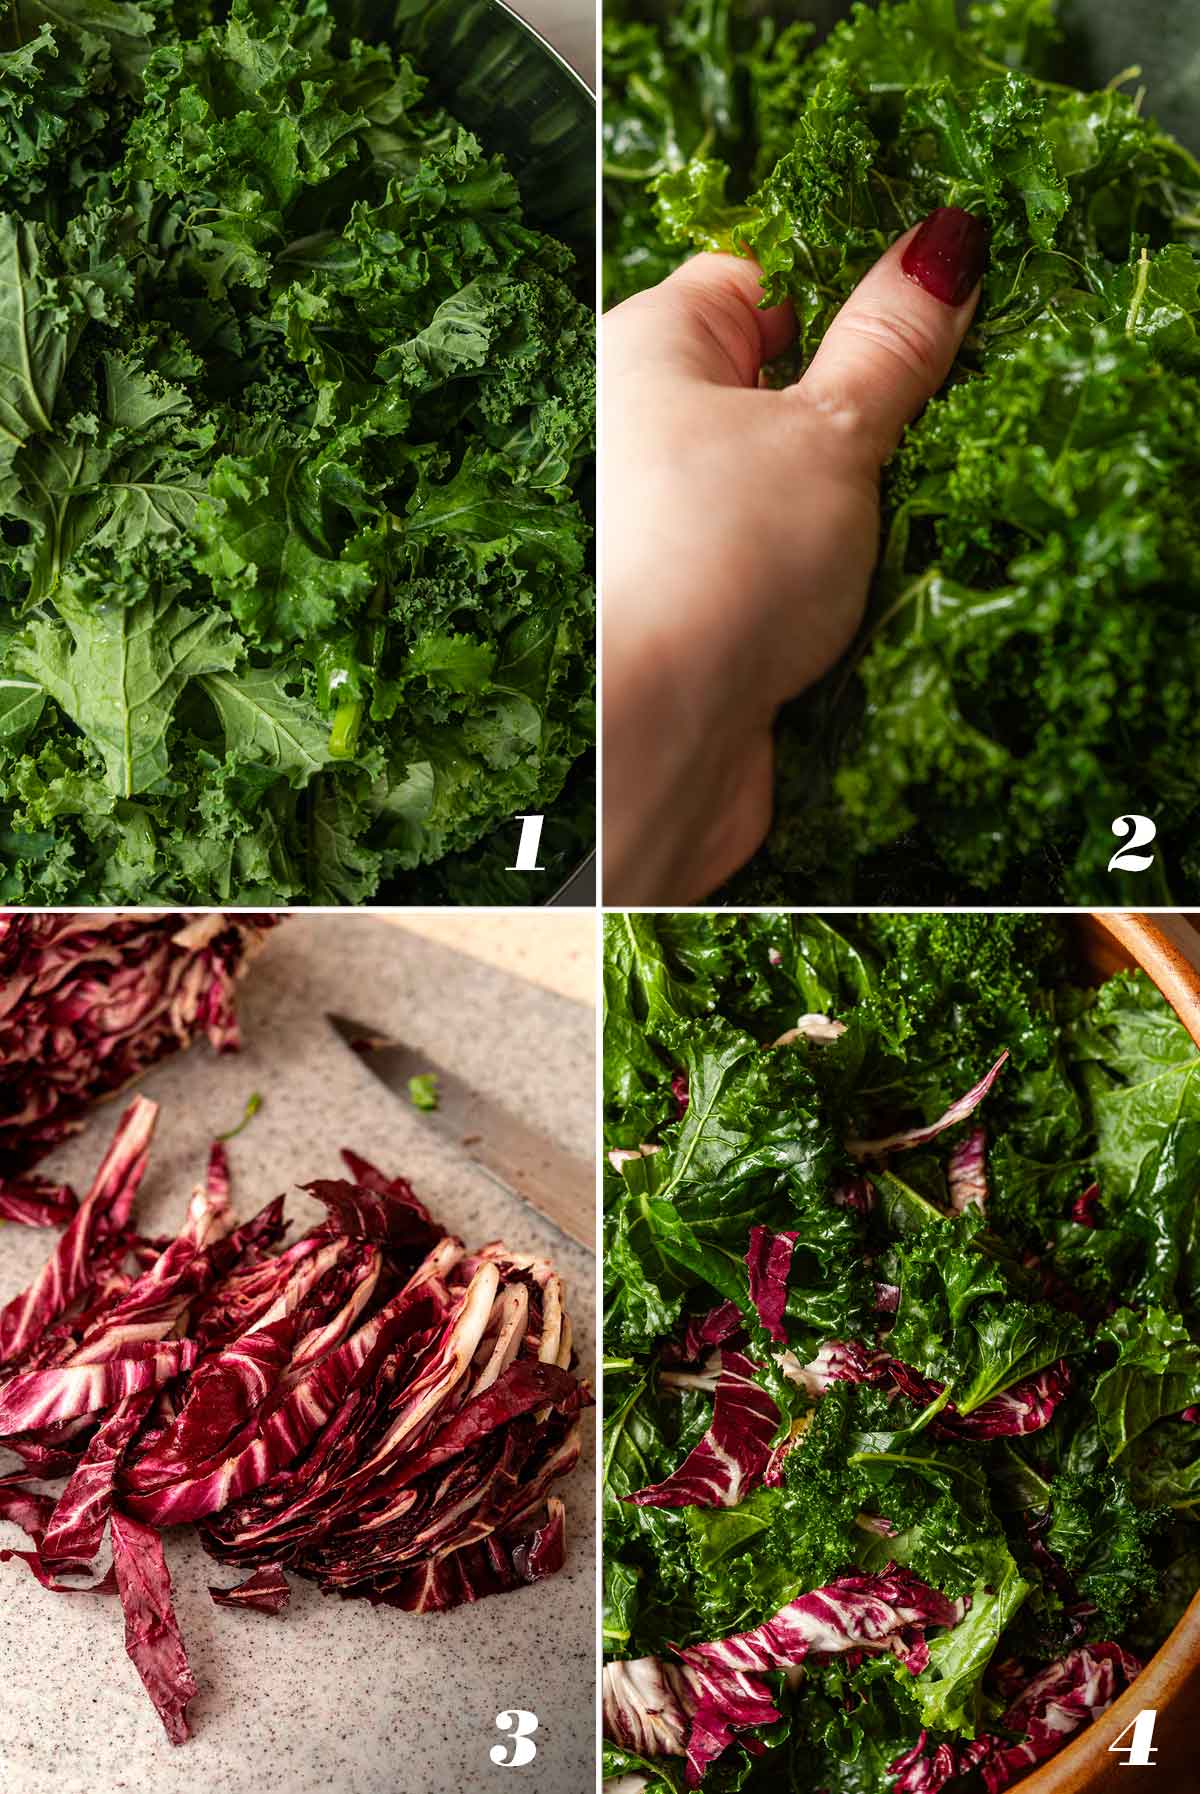 A collage of 4 numbered images showing how to prepare kale and radicchio for salad.